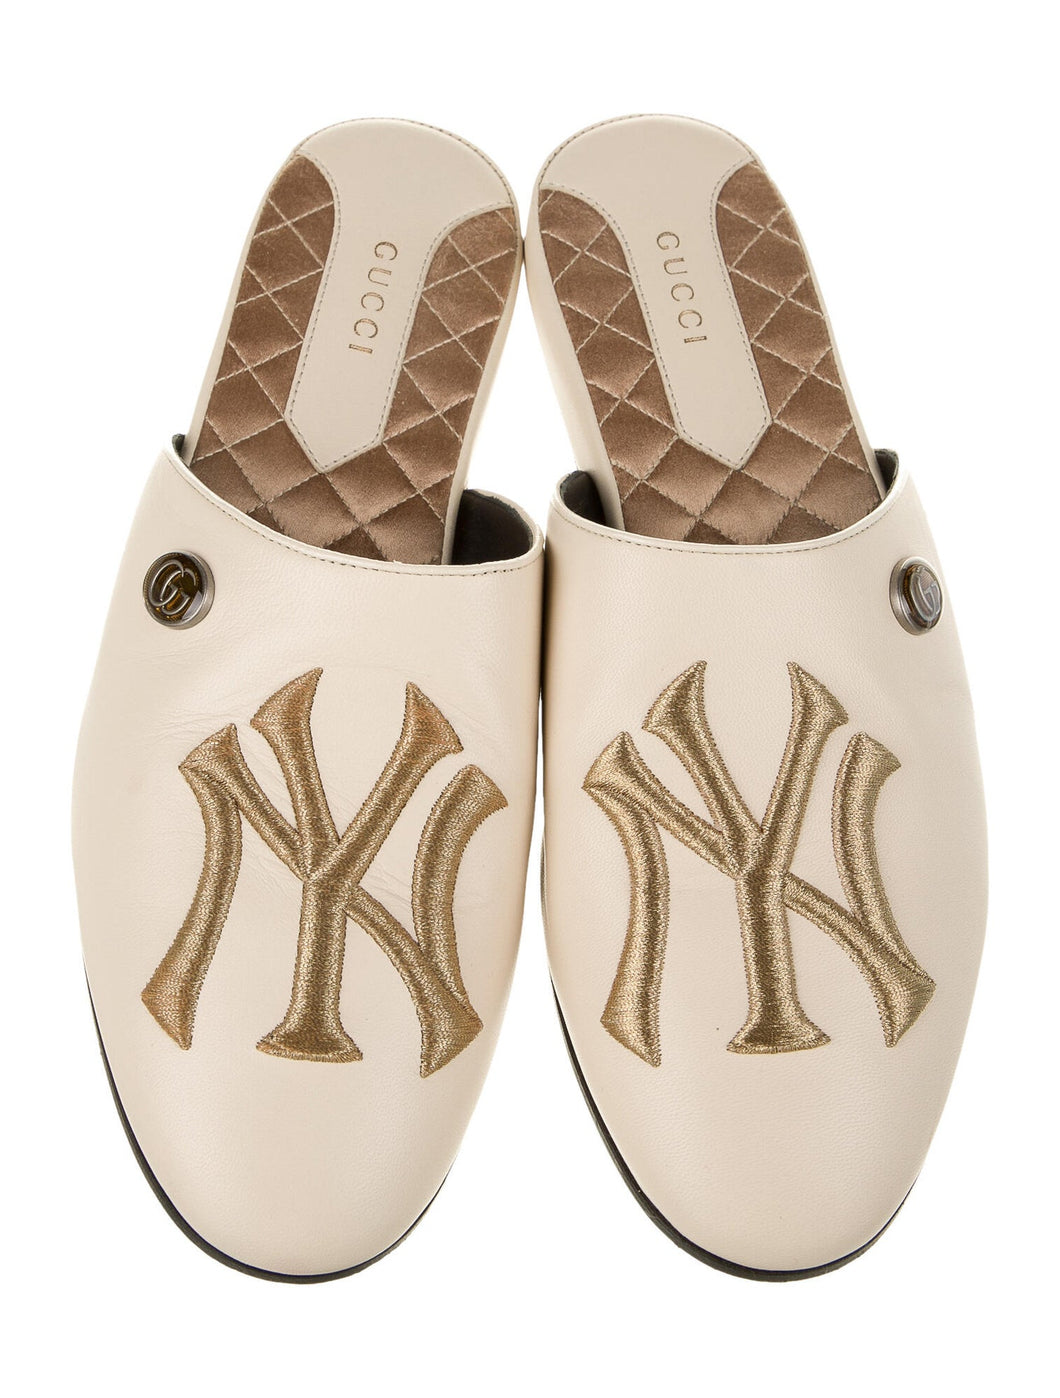 Gucci 2018 NY Yankees Slides in Ivory